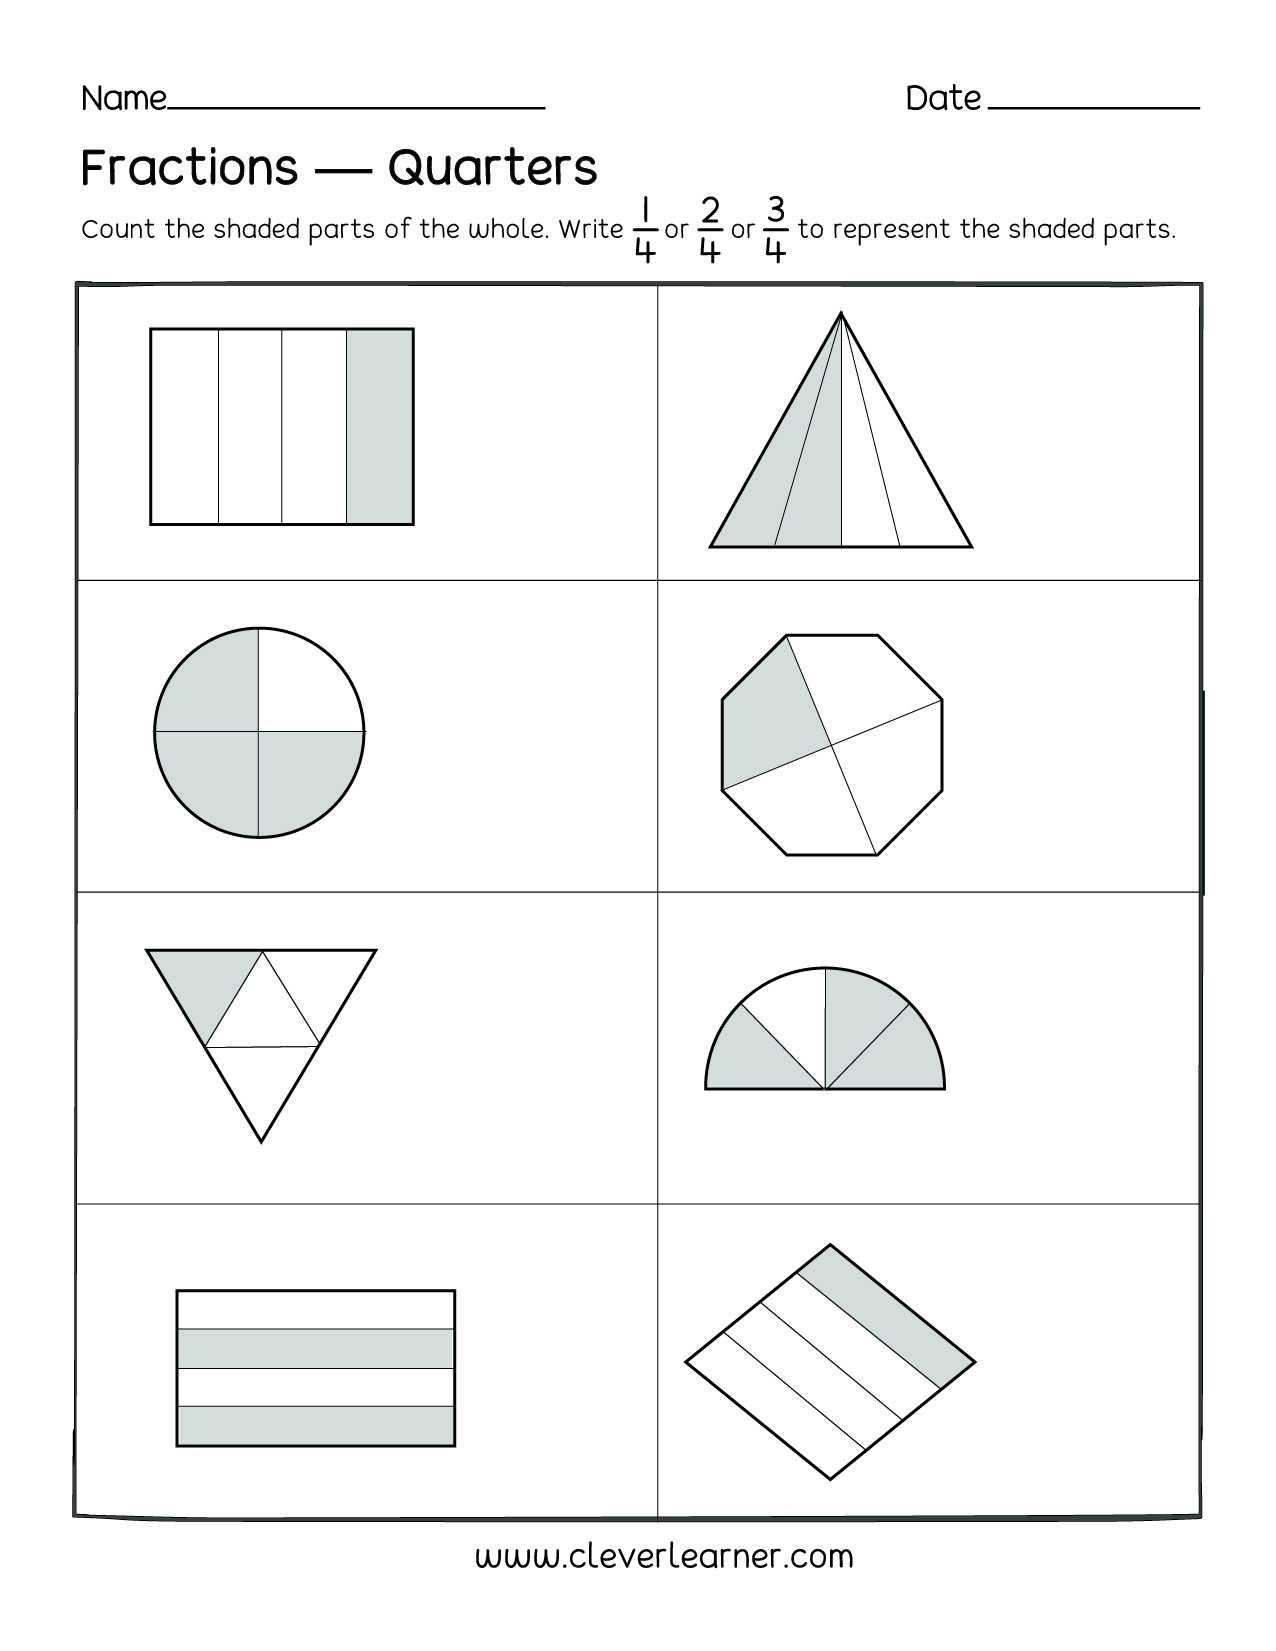 Customer Service Activity Worksheet as Well as Fun Activity On Fractions Fourths Worksheets for Children